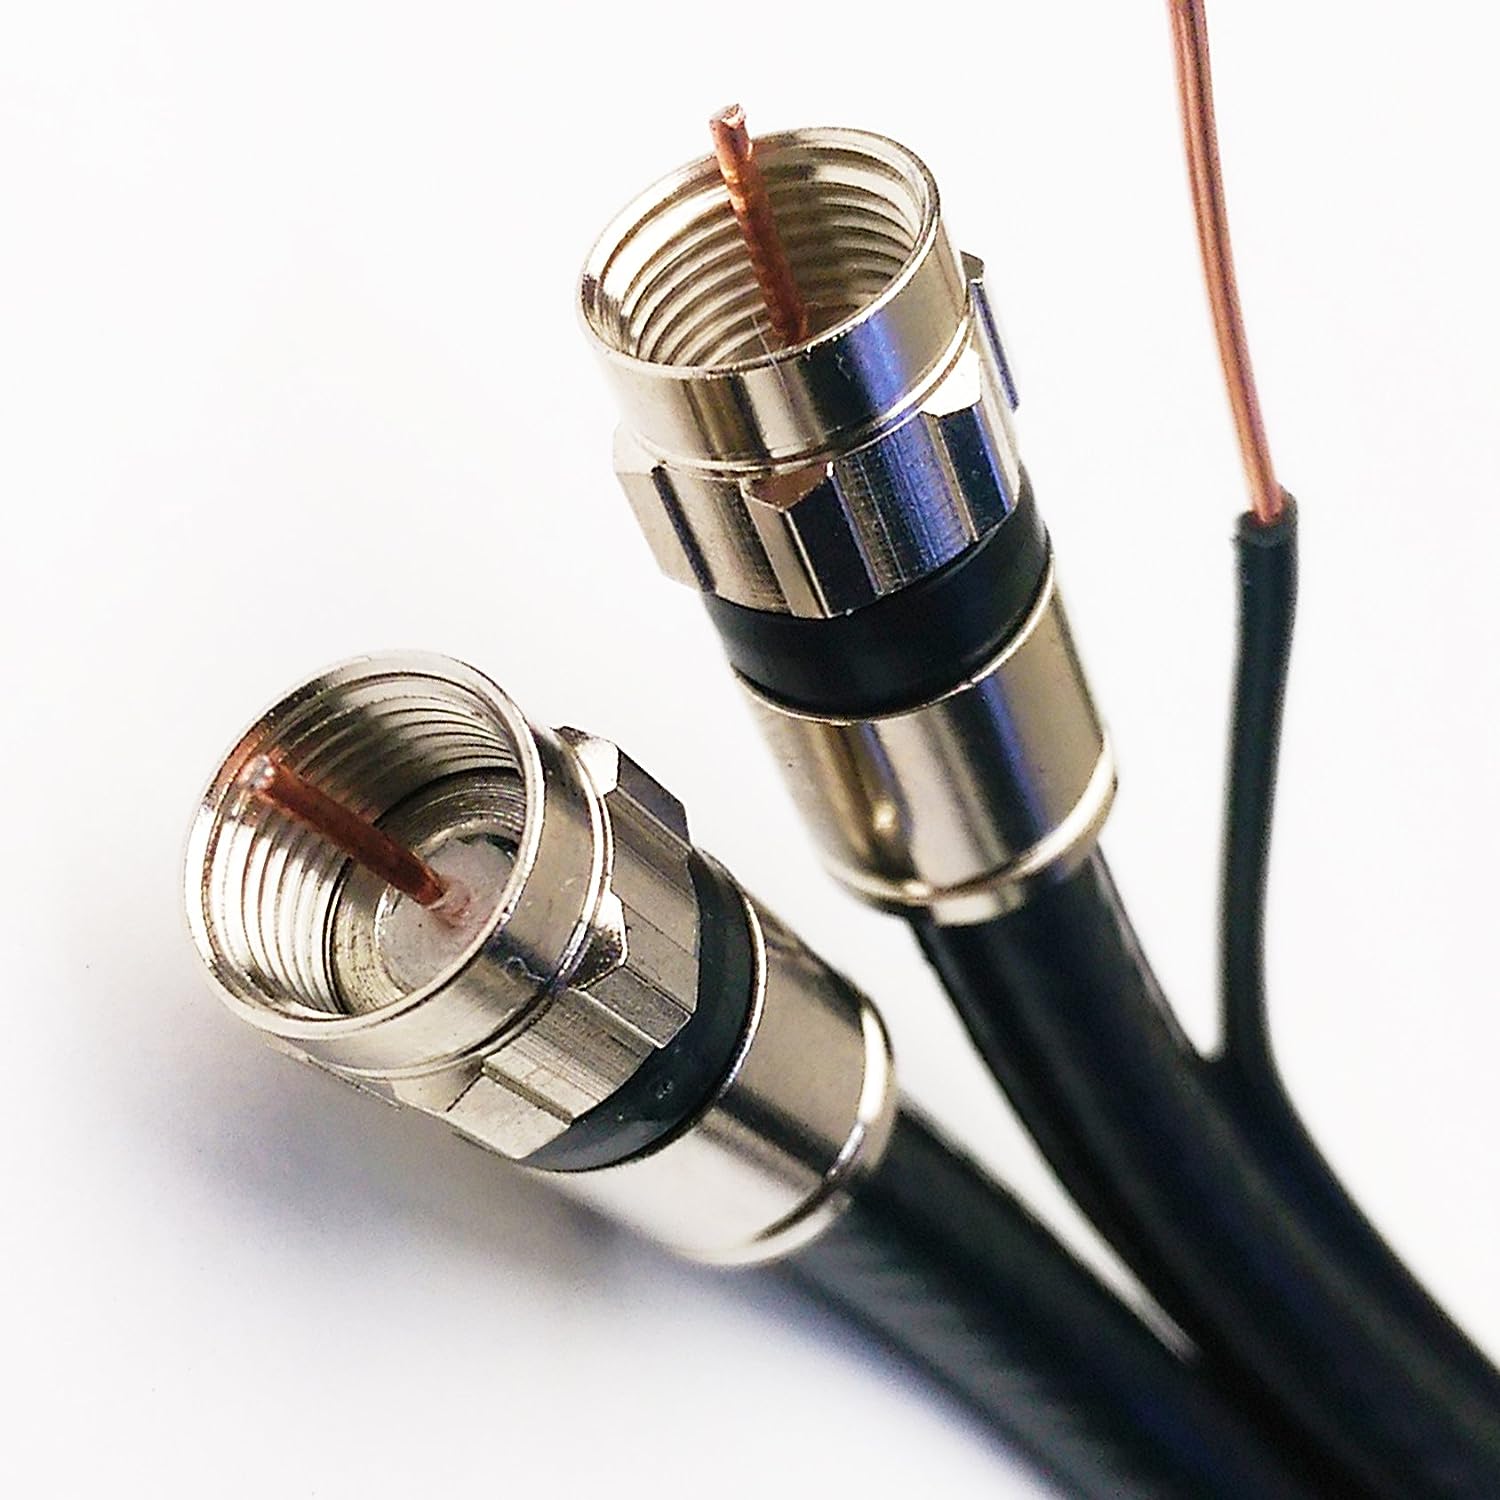 What Type Of Coaxial Cable Is Recommended For Digital Television Cable Signals?